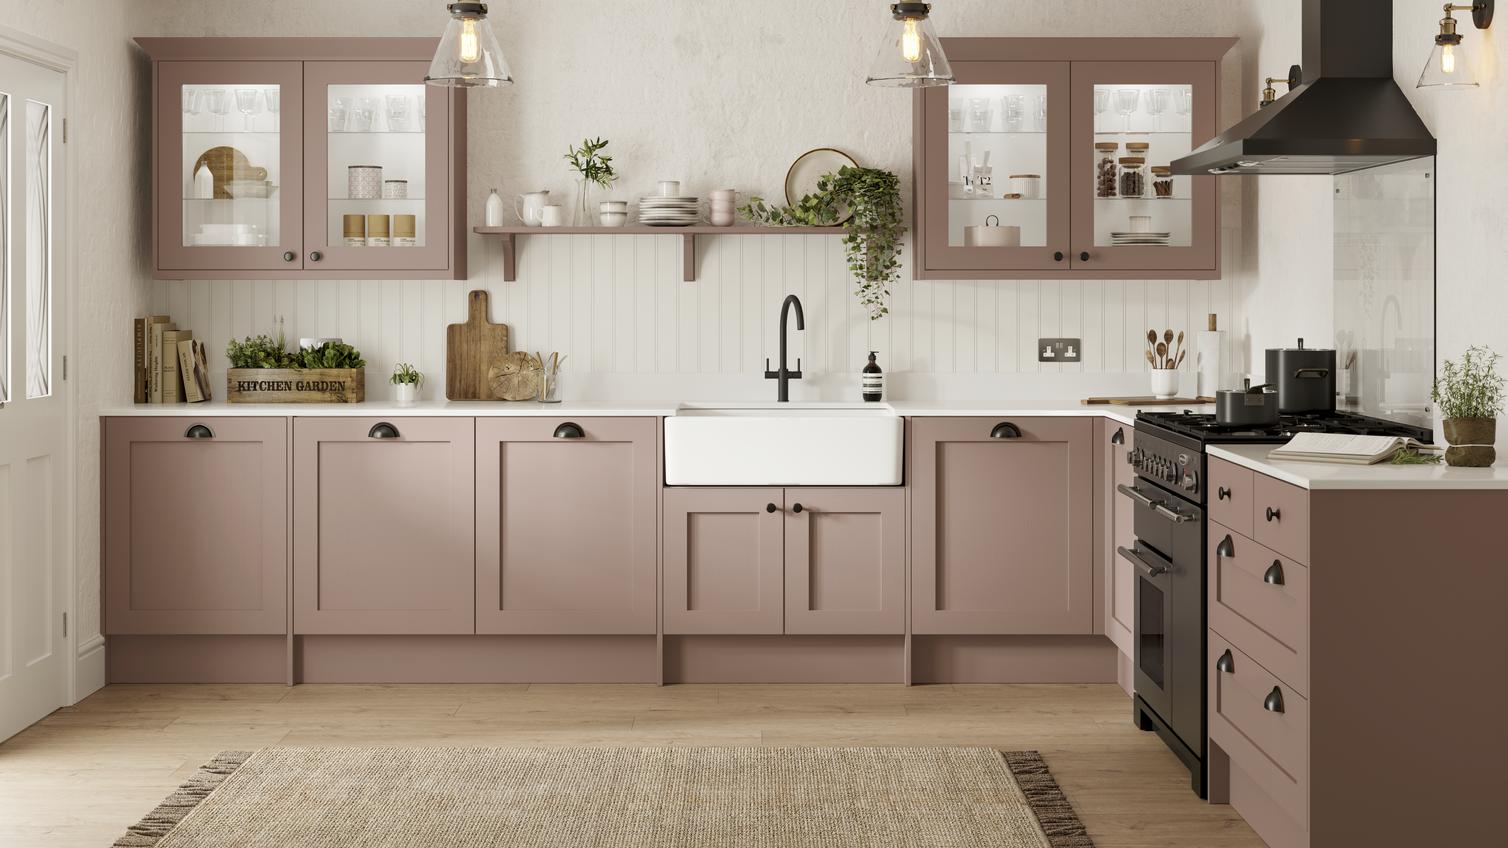 A pink, antique rose kitchen in a shaker style. It is an L-shaped layout, has light oak flooring, and black appliances.